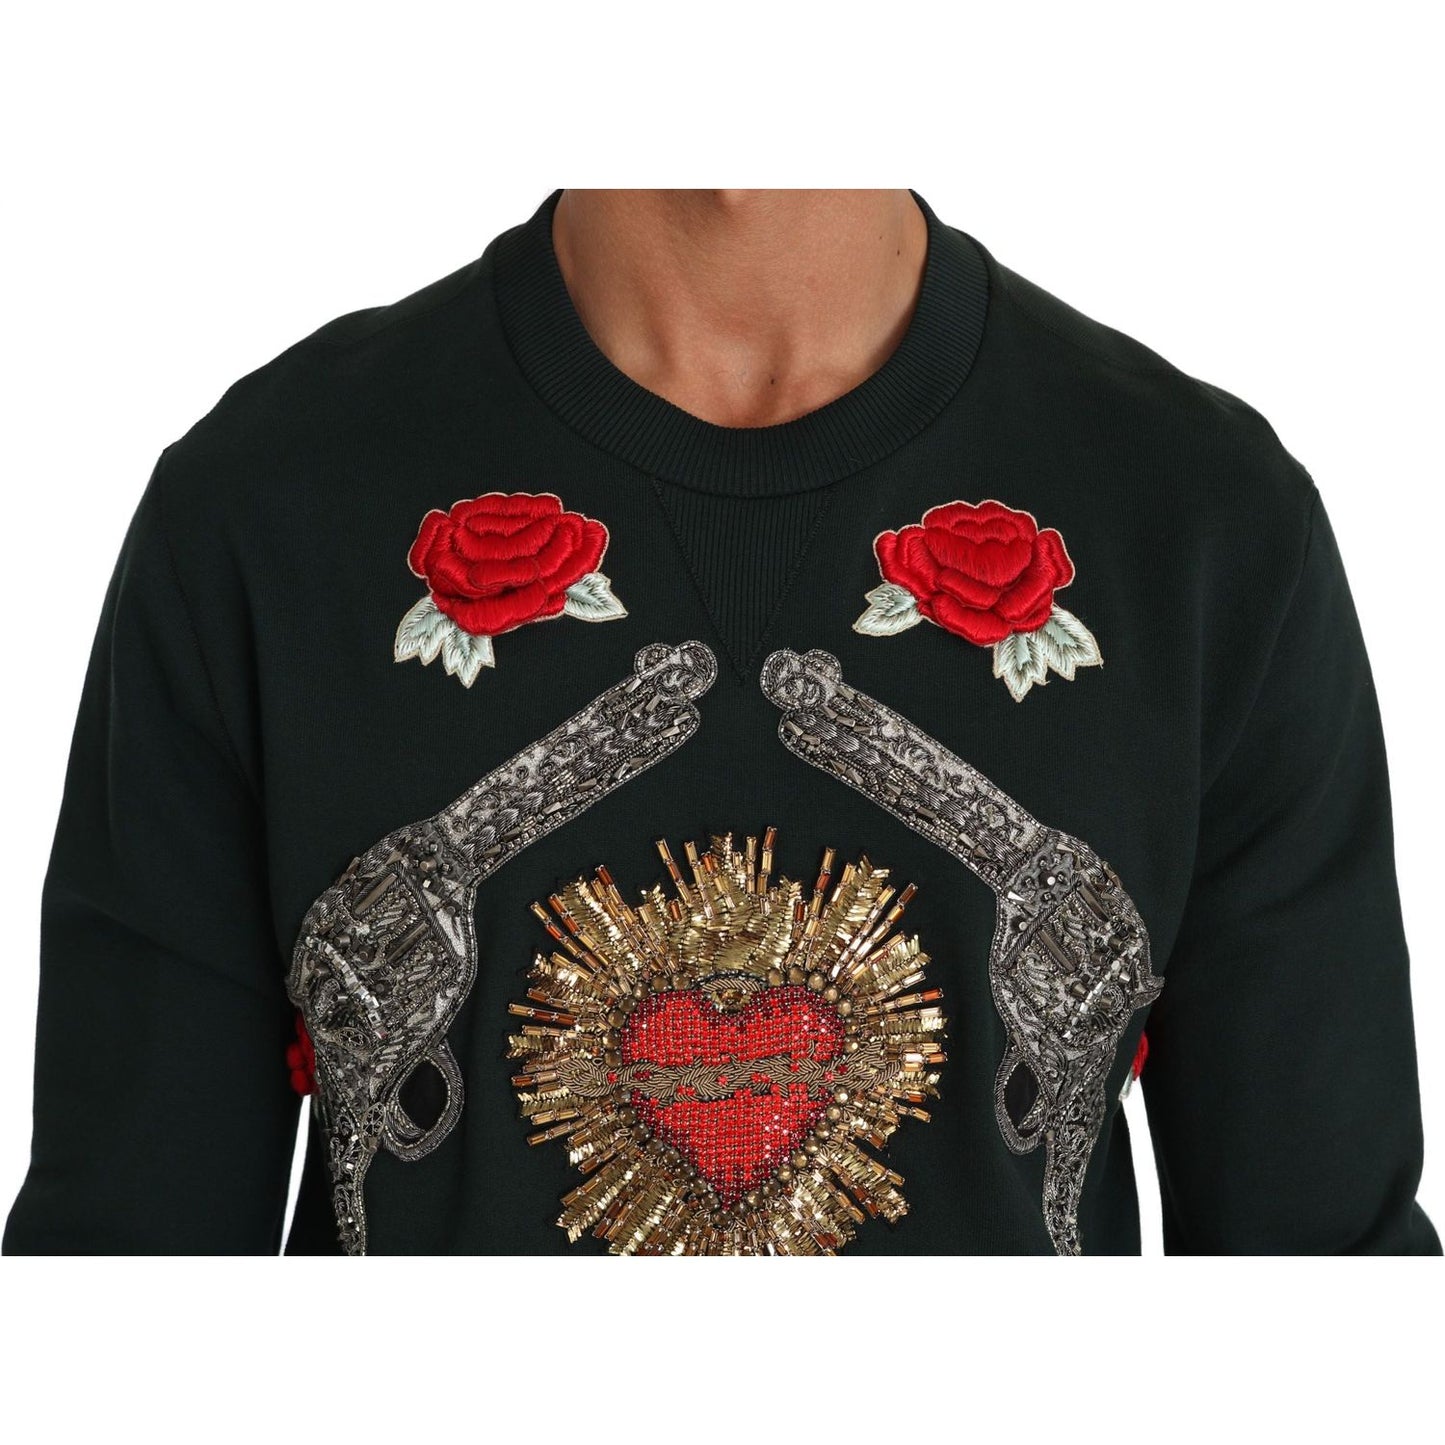 Dolce & Gabbana Emerald Cotton Sweater with Crystal Embroidery green-crystal-heart-roses-gun-sweater IMG_1249-scaled-3a42b52e-c70.jpg